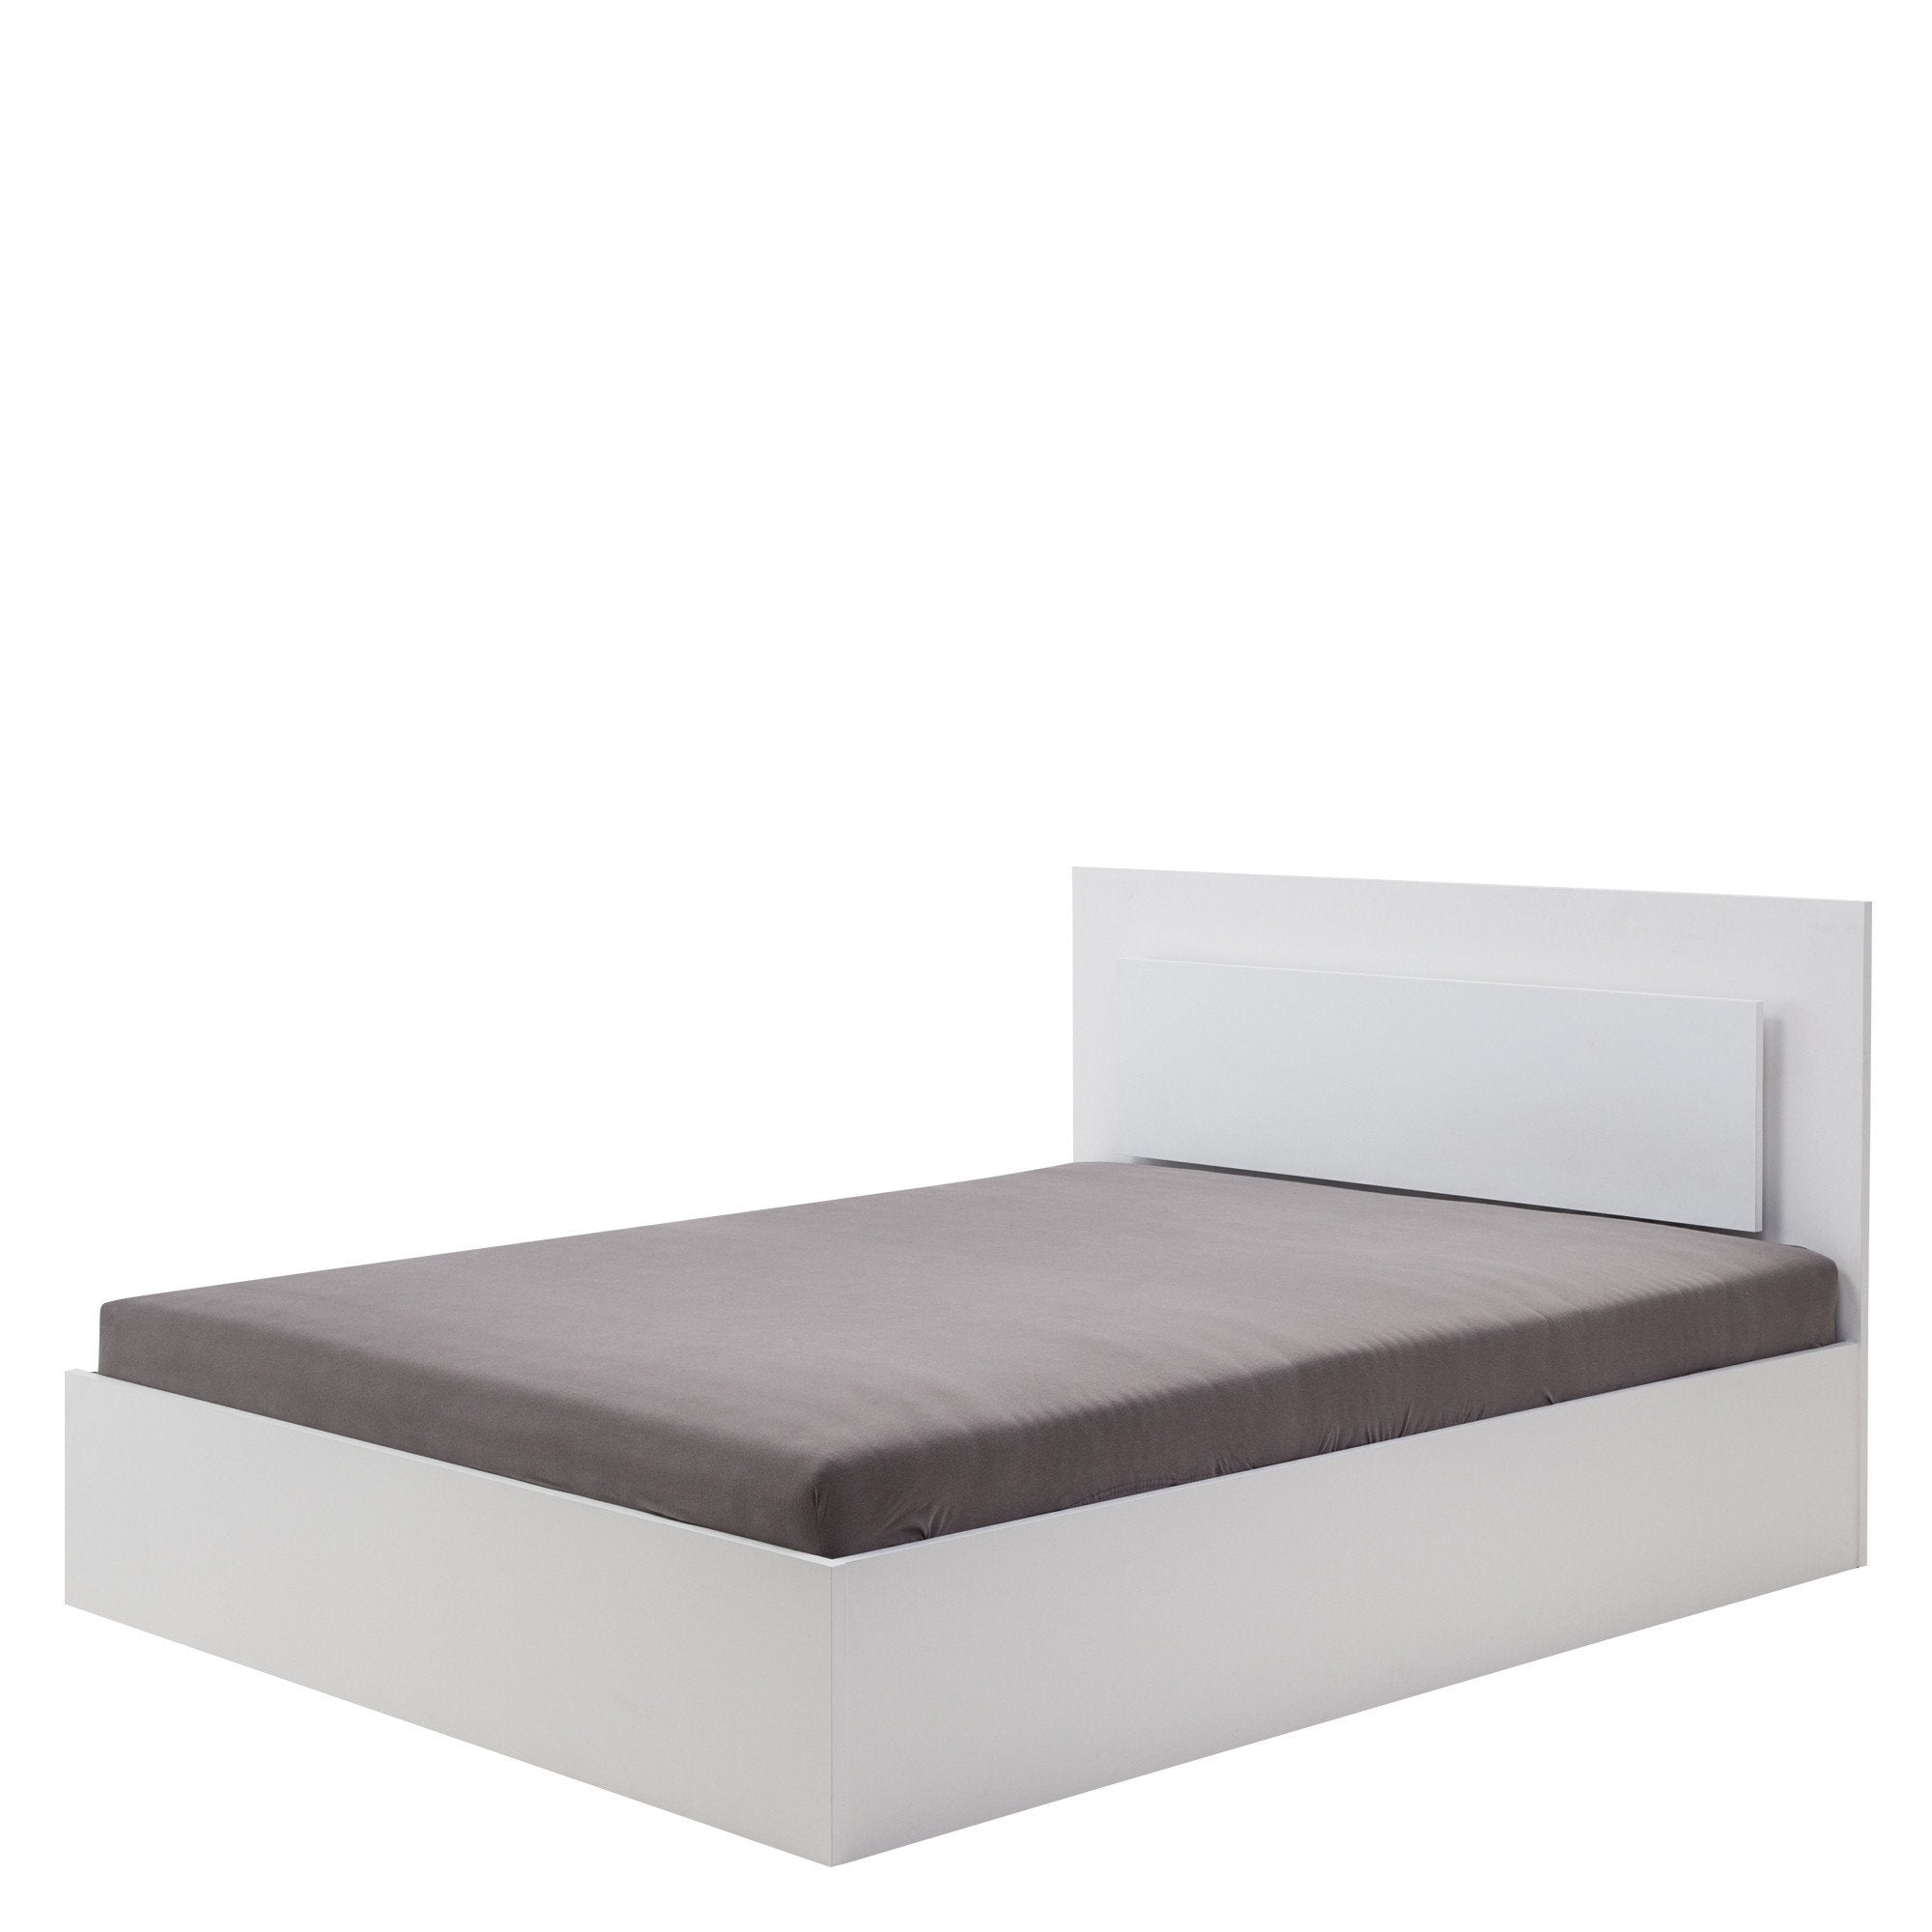 View Siena Bed with LED White Gloss 180 x 200cm No information